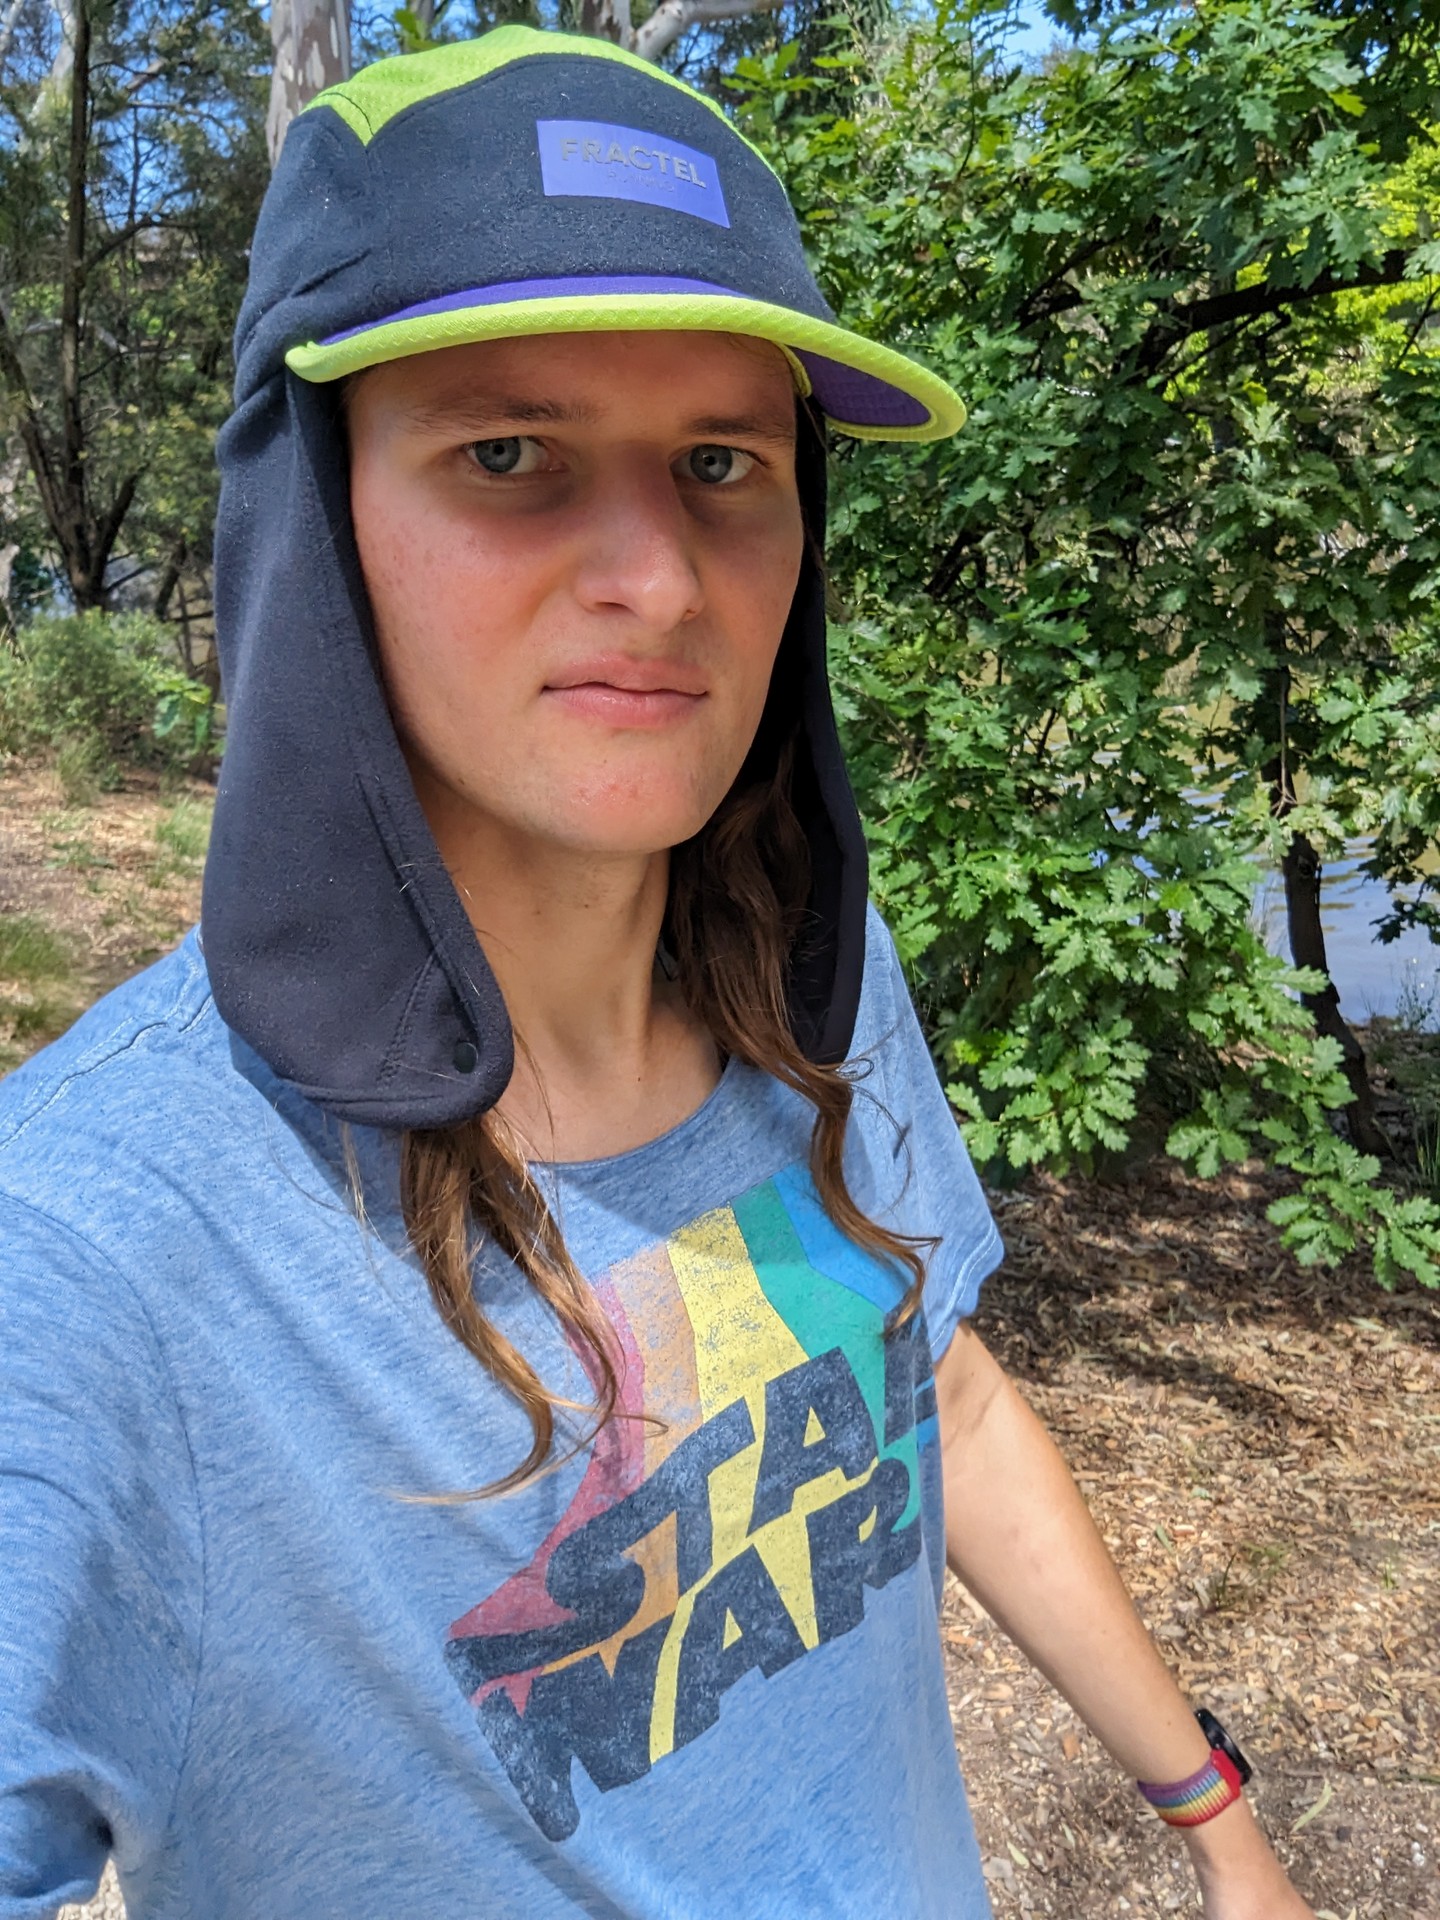 Self of myself wearing a hat while outdoors on a walking track